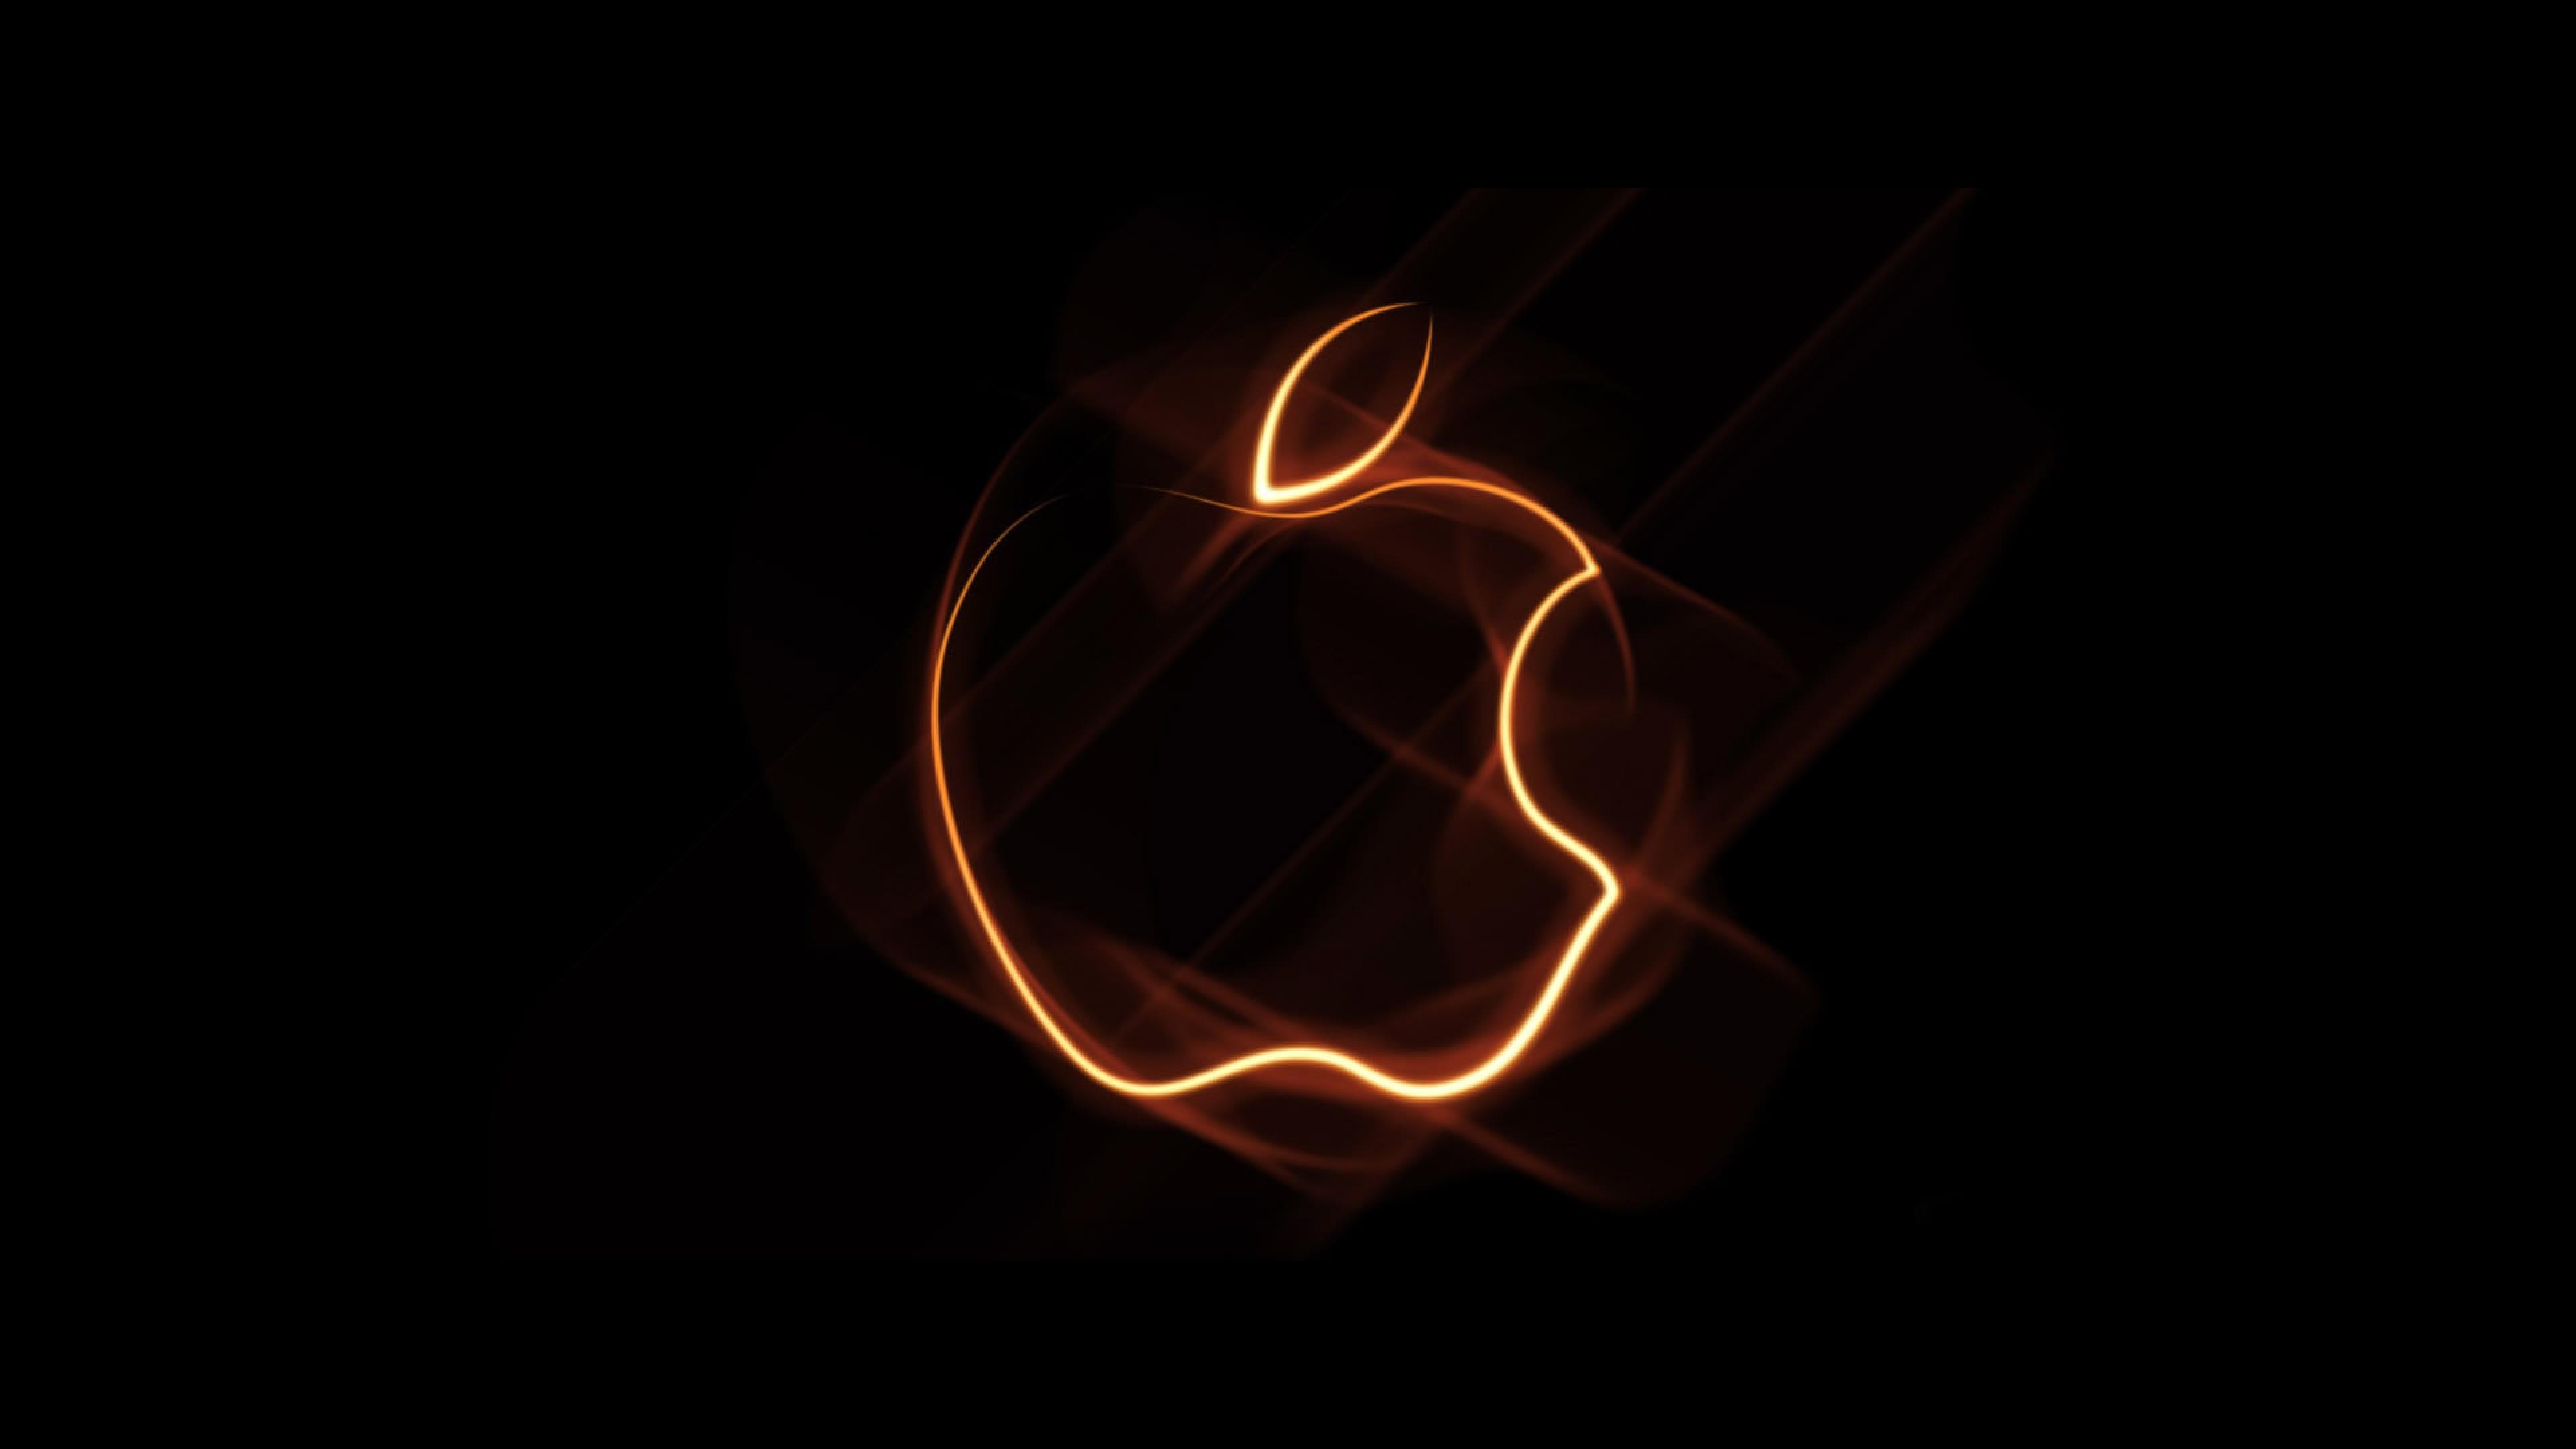 Enhance Your iPhone Experience with a Colorful Apple Logo Wallpaper 4K